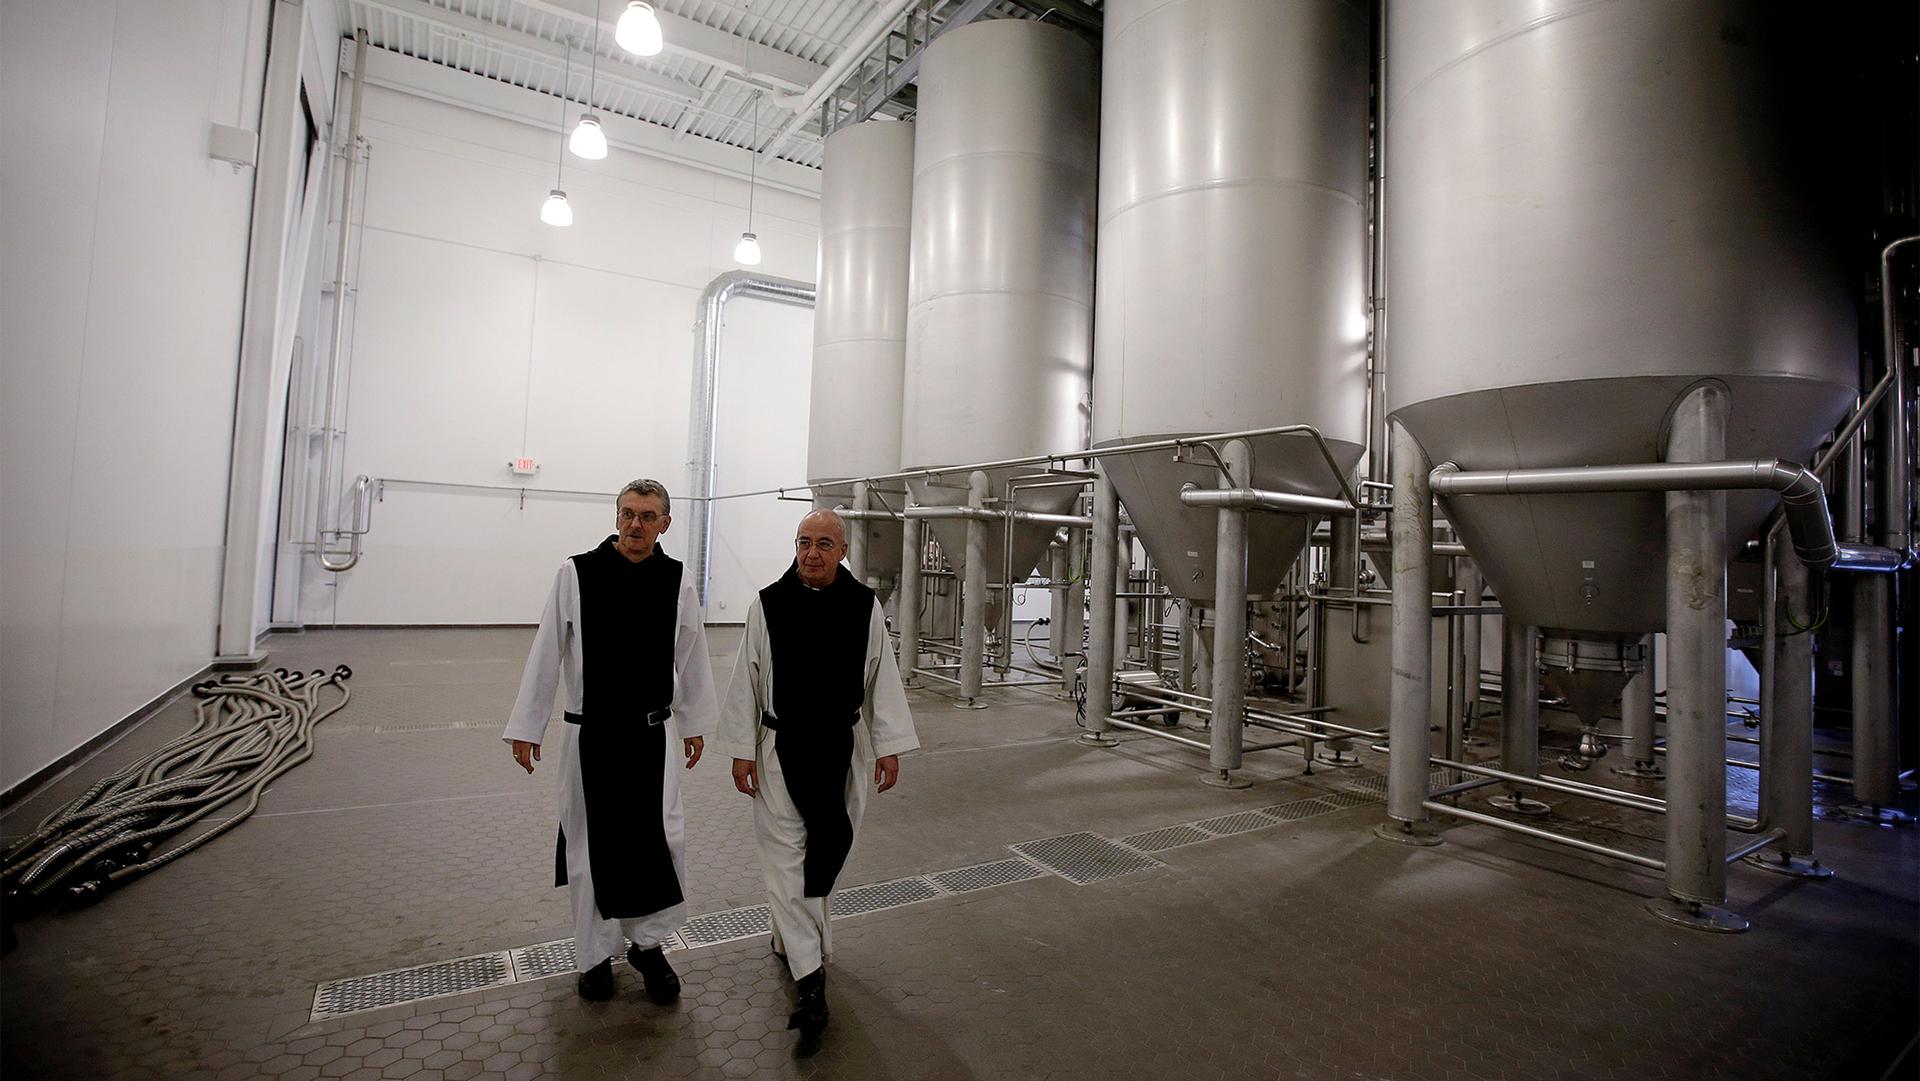 Father Damion, abbot at St. Joseph's Trappist Abbey, left, and Spencer Brewery director Father Isaac walk through their new, state-of-the-art facility.